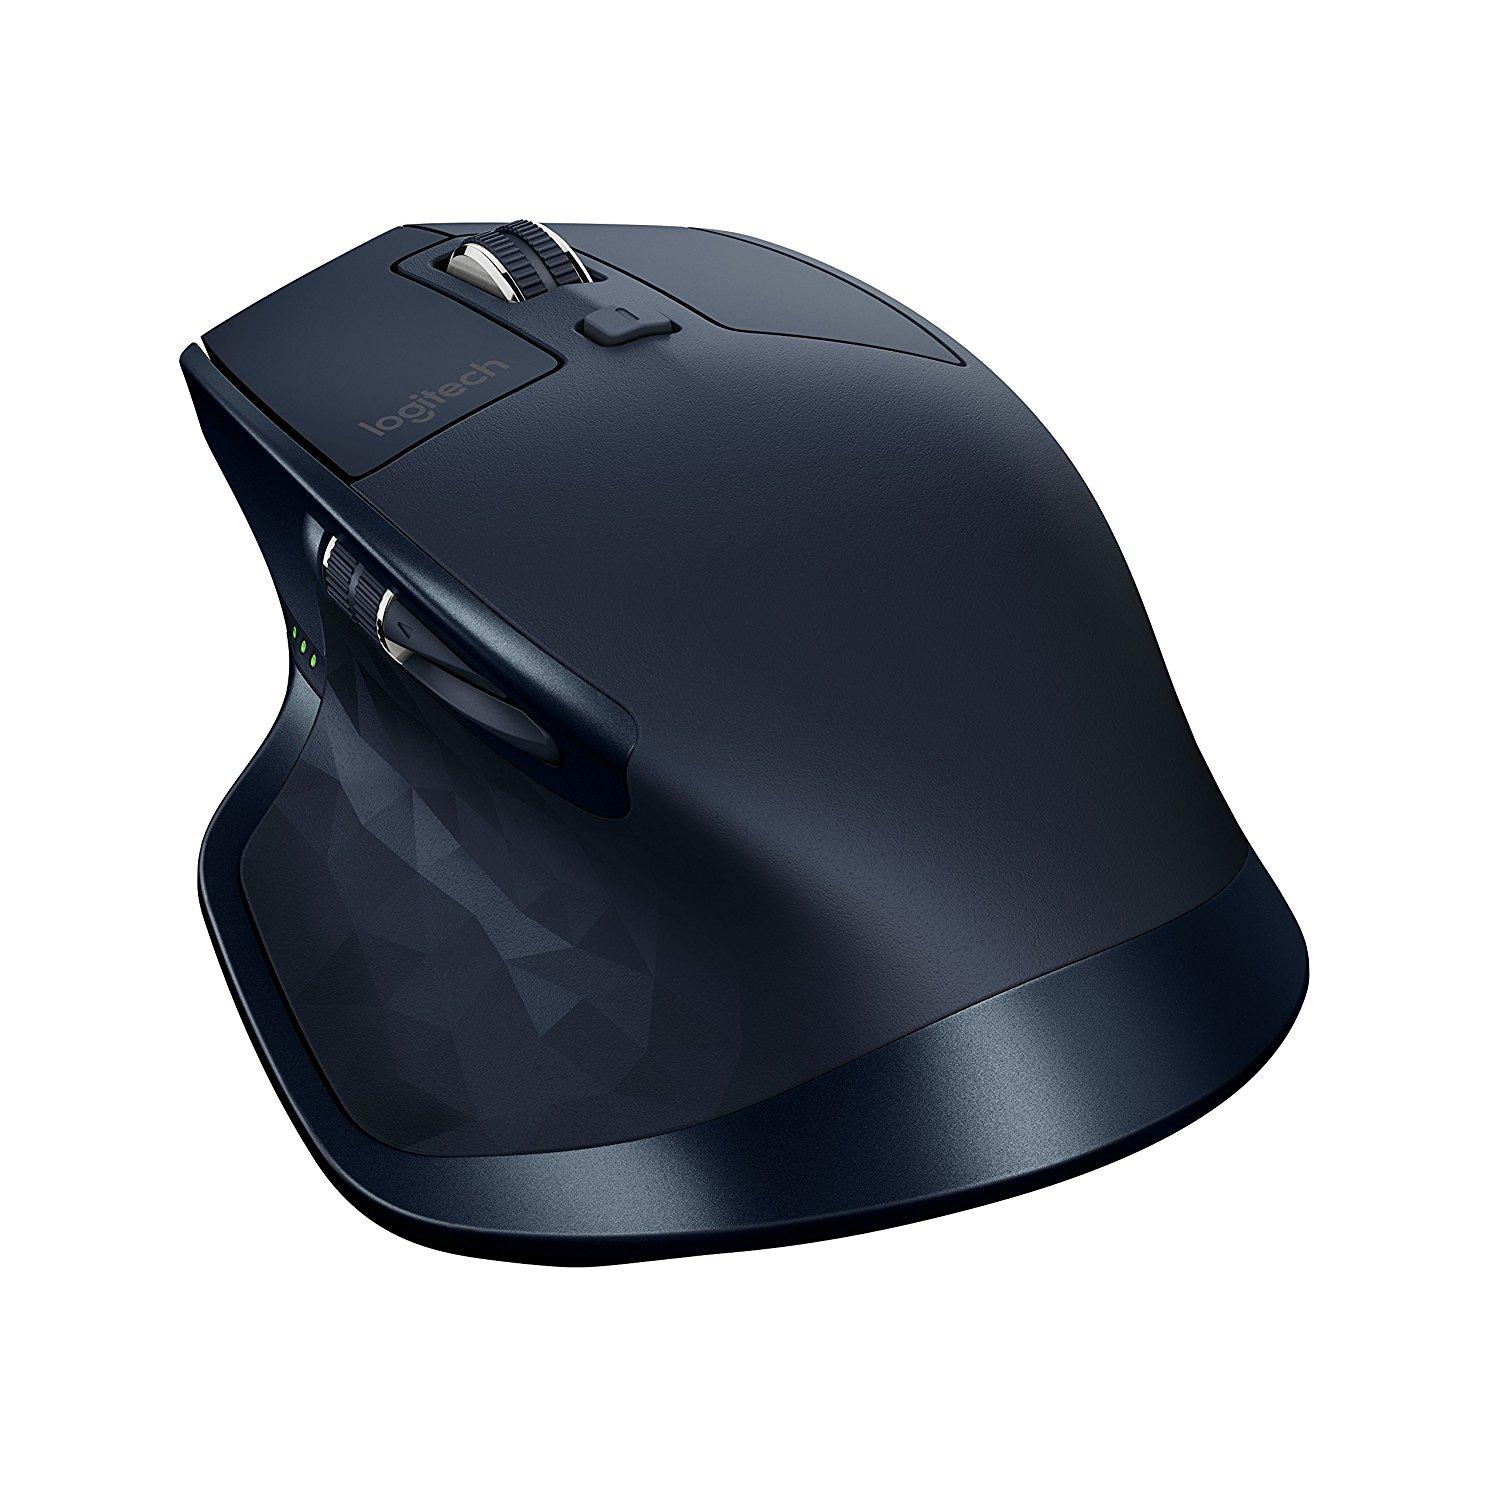 Logitech MX Master Wireless Laser Mouse for 59.99 Shipped